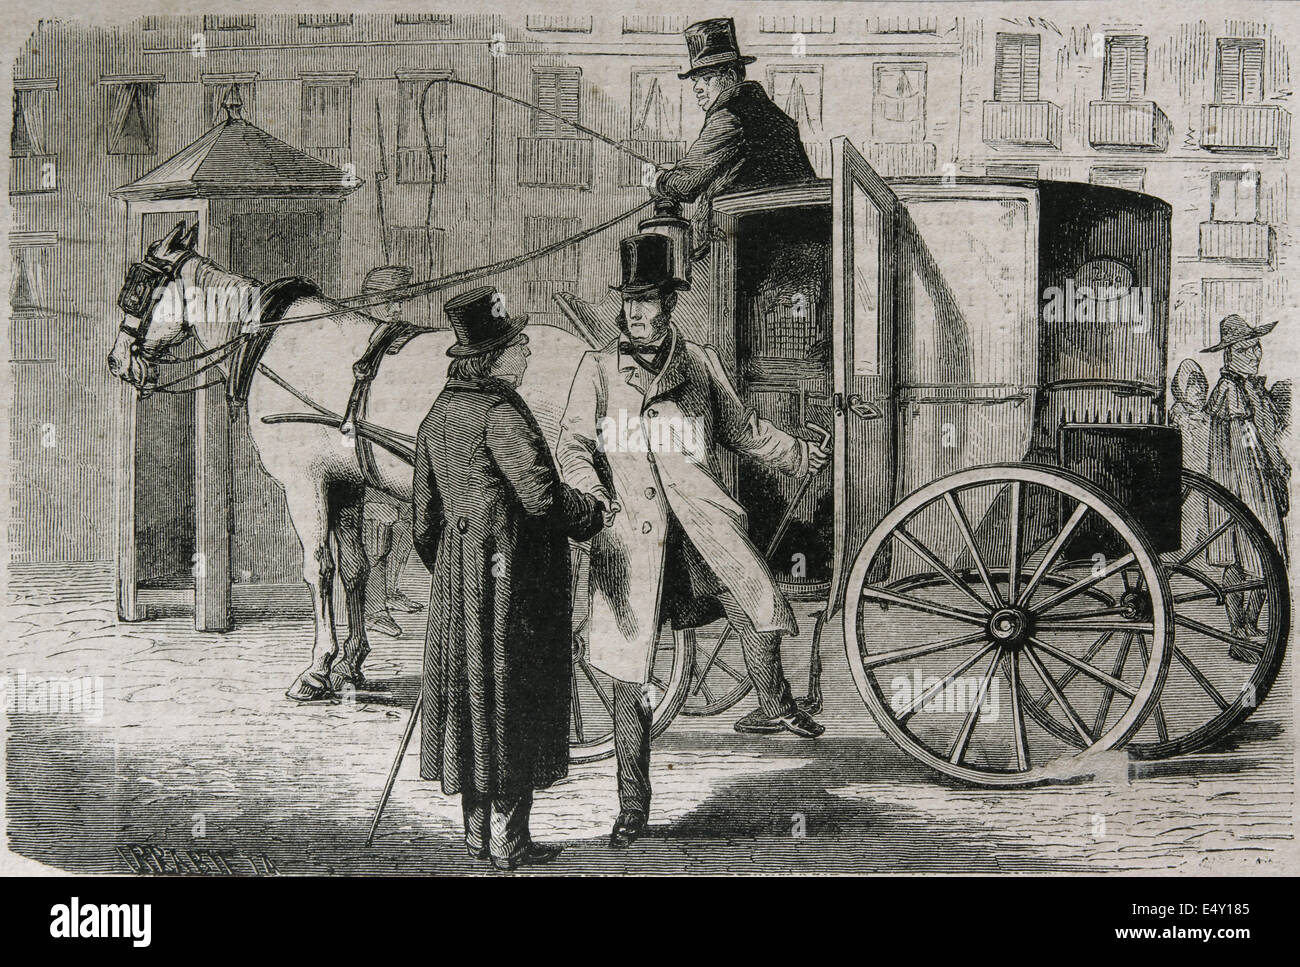 Transportation history. Diligence. Engraving created by Irrabieta, 1886. Stock Photo